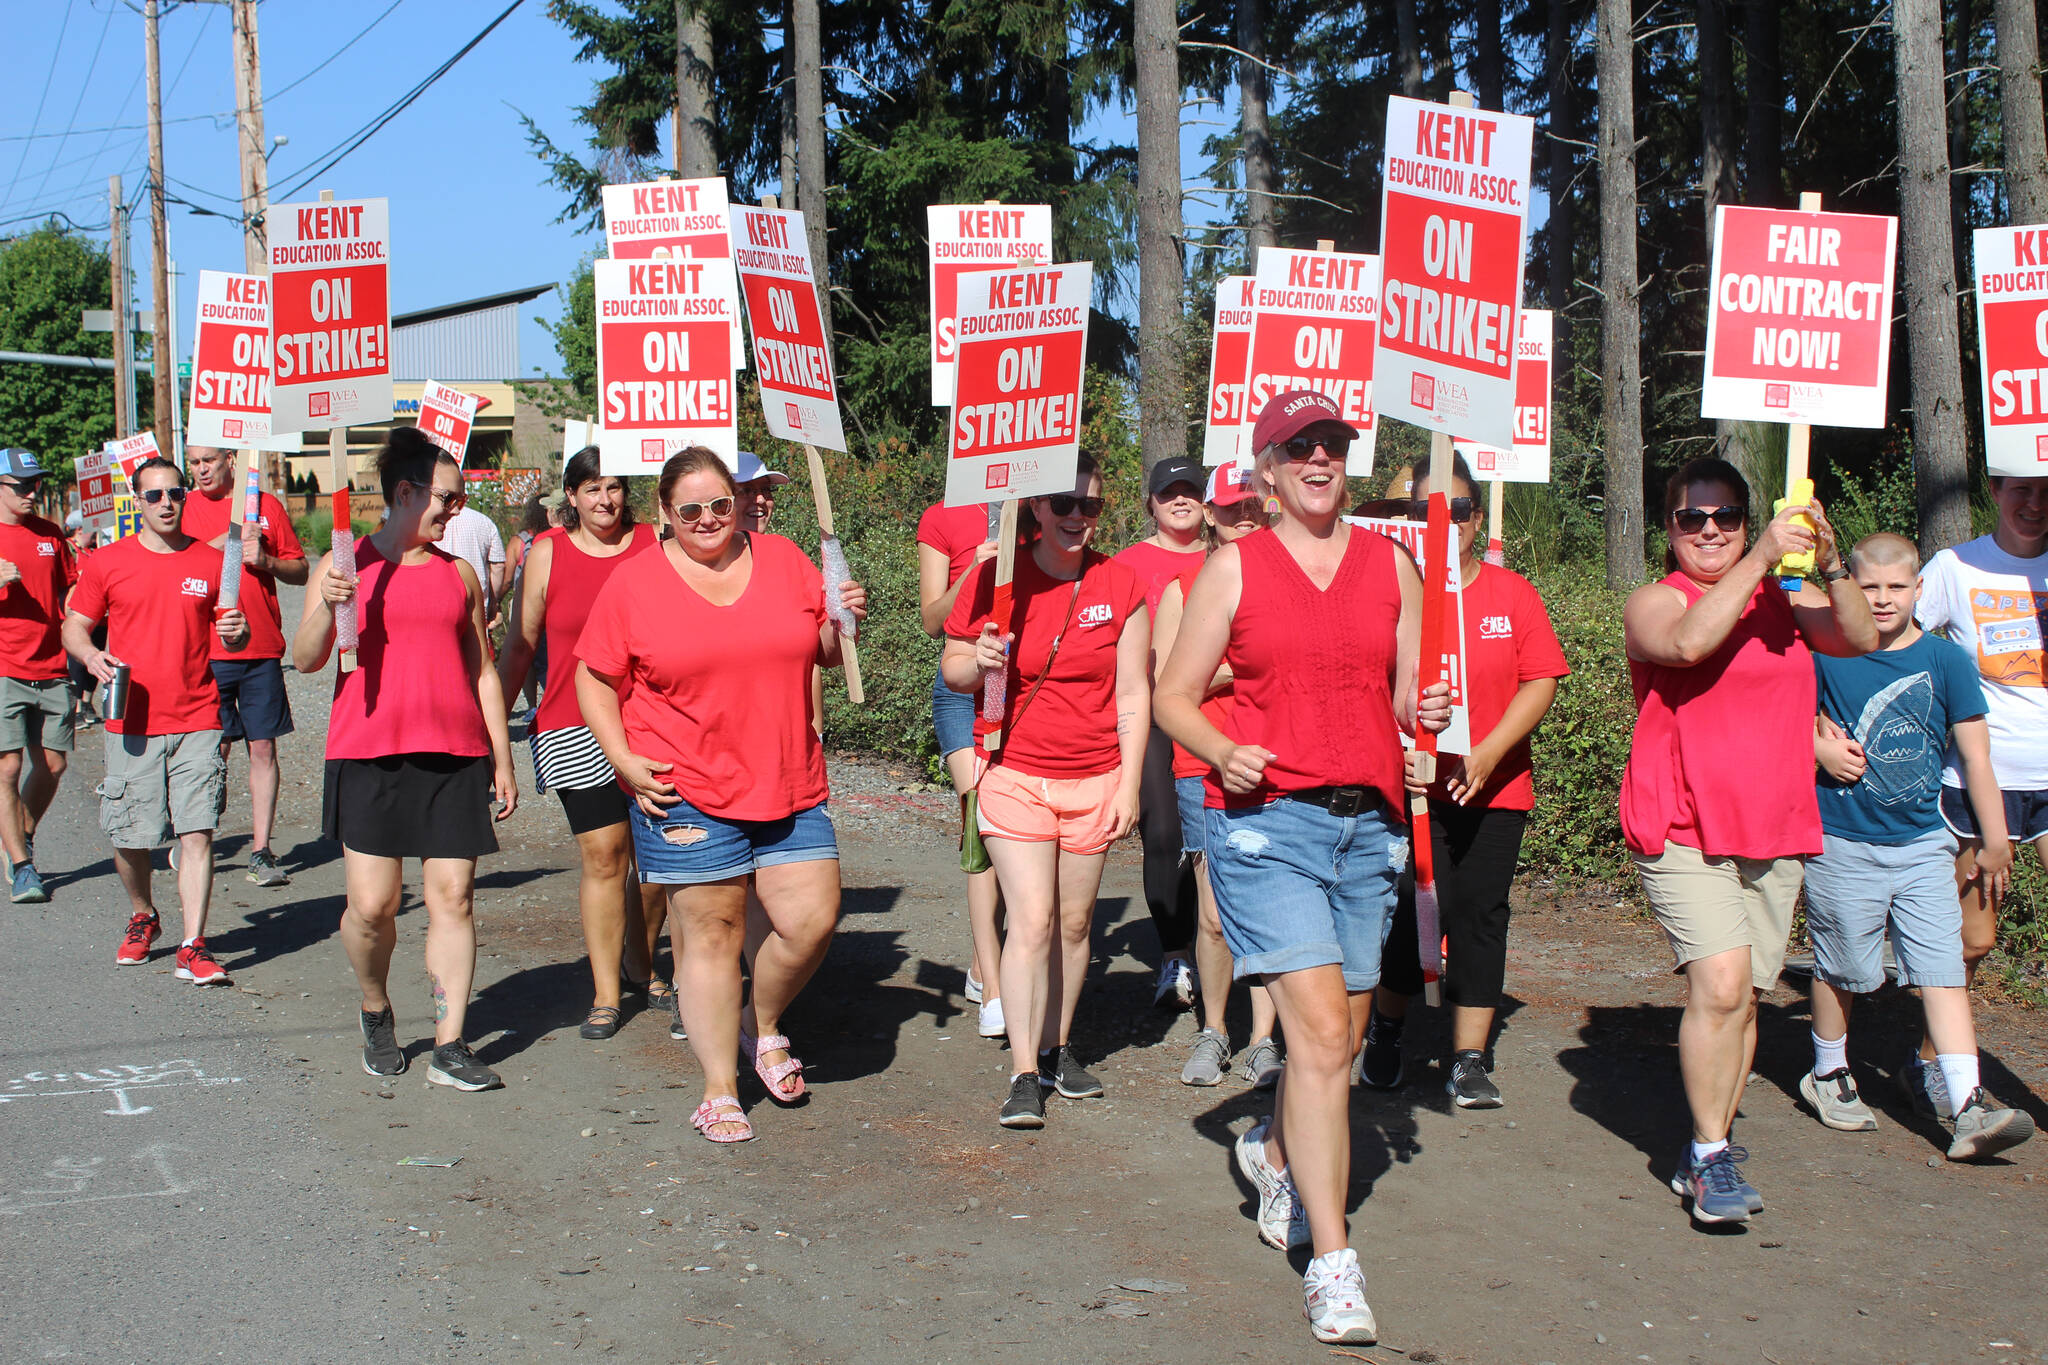 Kent School District teachers picket alongside the busy road outside Jenkins Creek Elementary School in Covington. “We need help for the kids to learn,” said special education teacher Connie Compton, who has worked at Jenkins Creek for 25 years. BAILEY JO JOSIE/Sound Publishing.